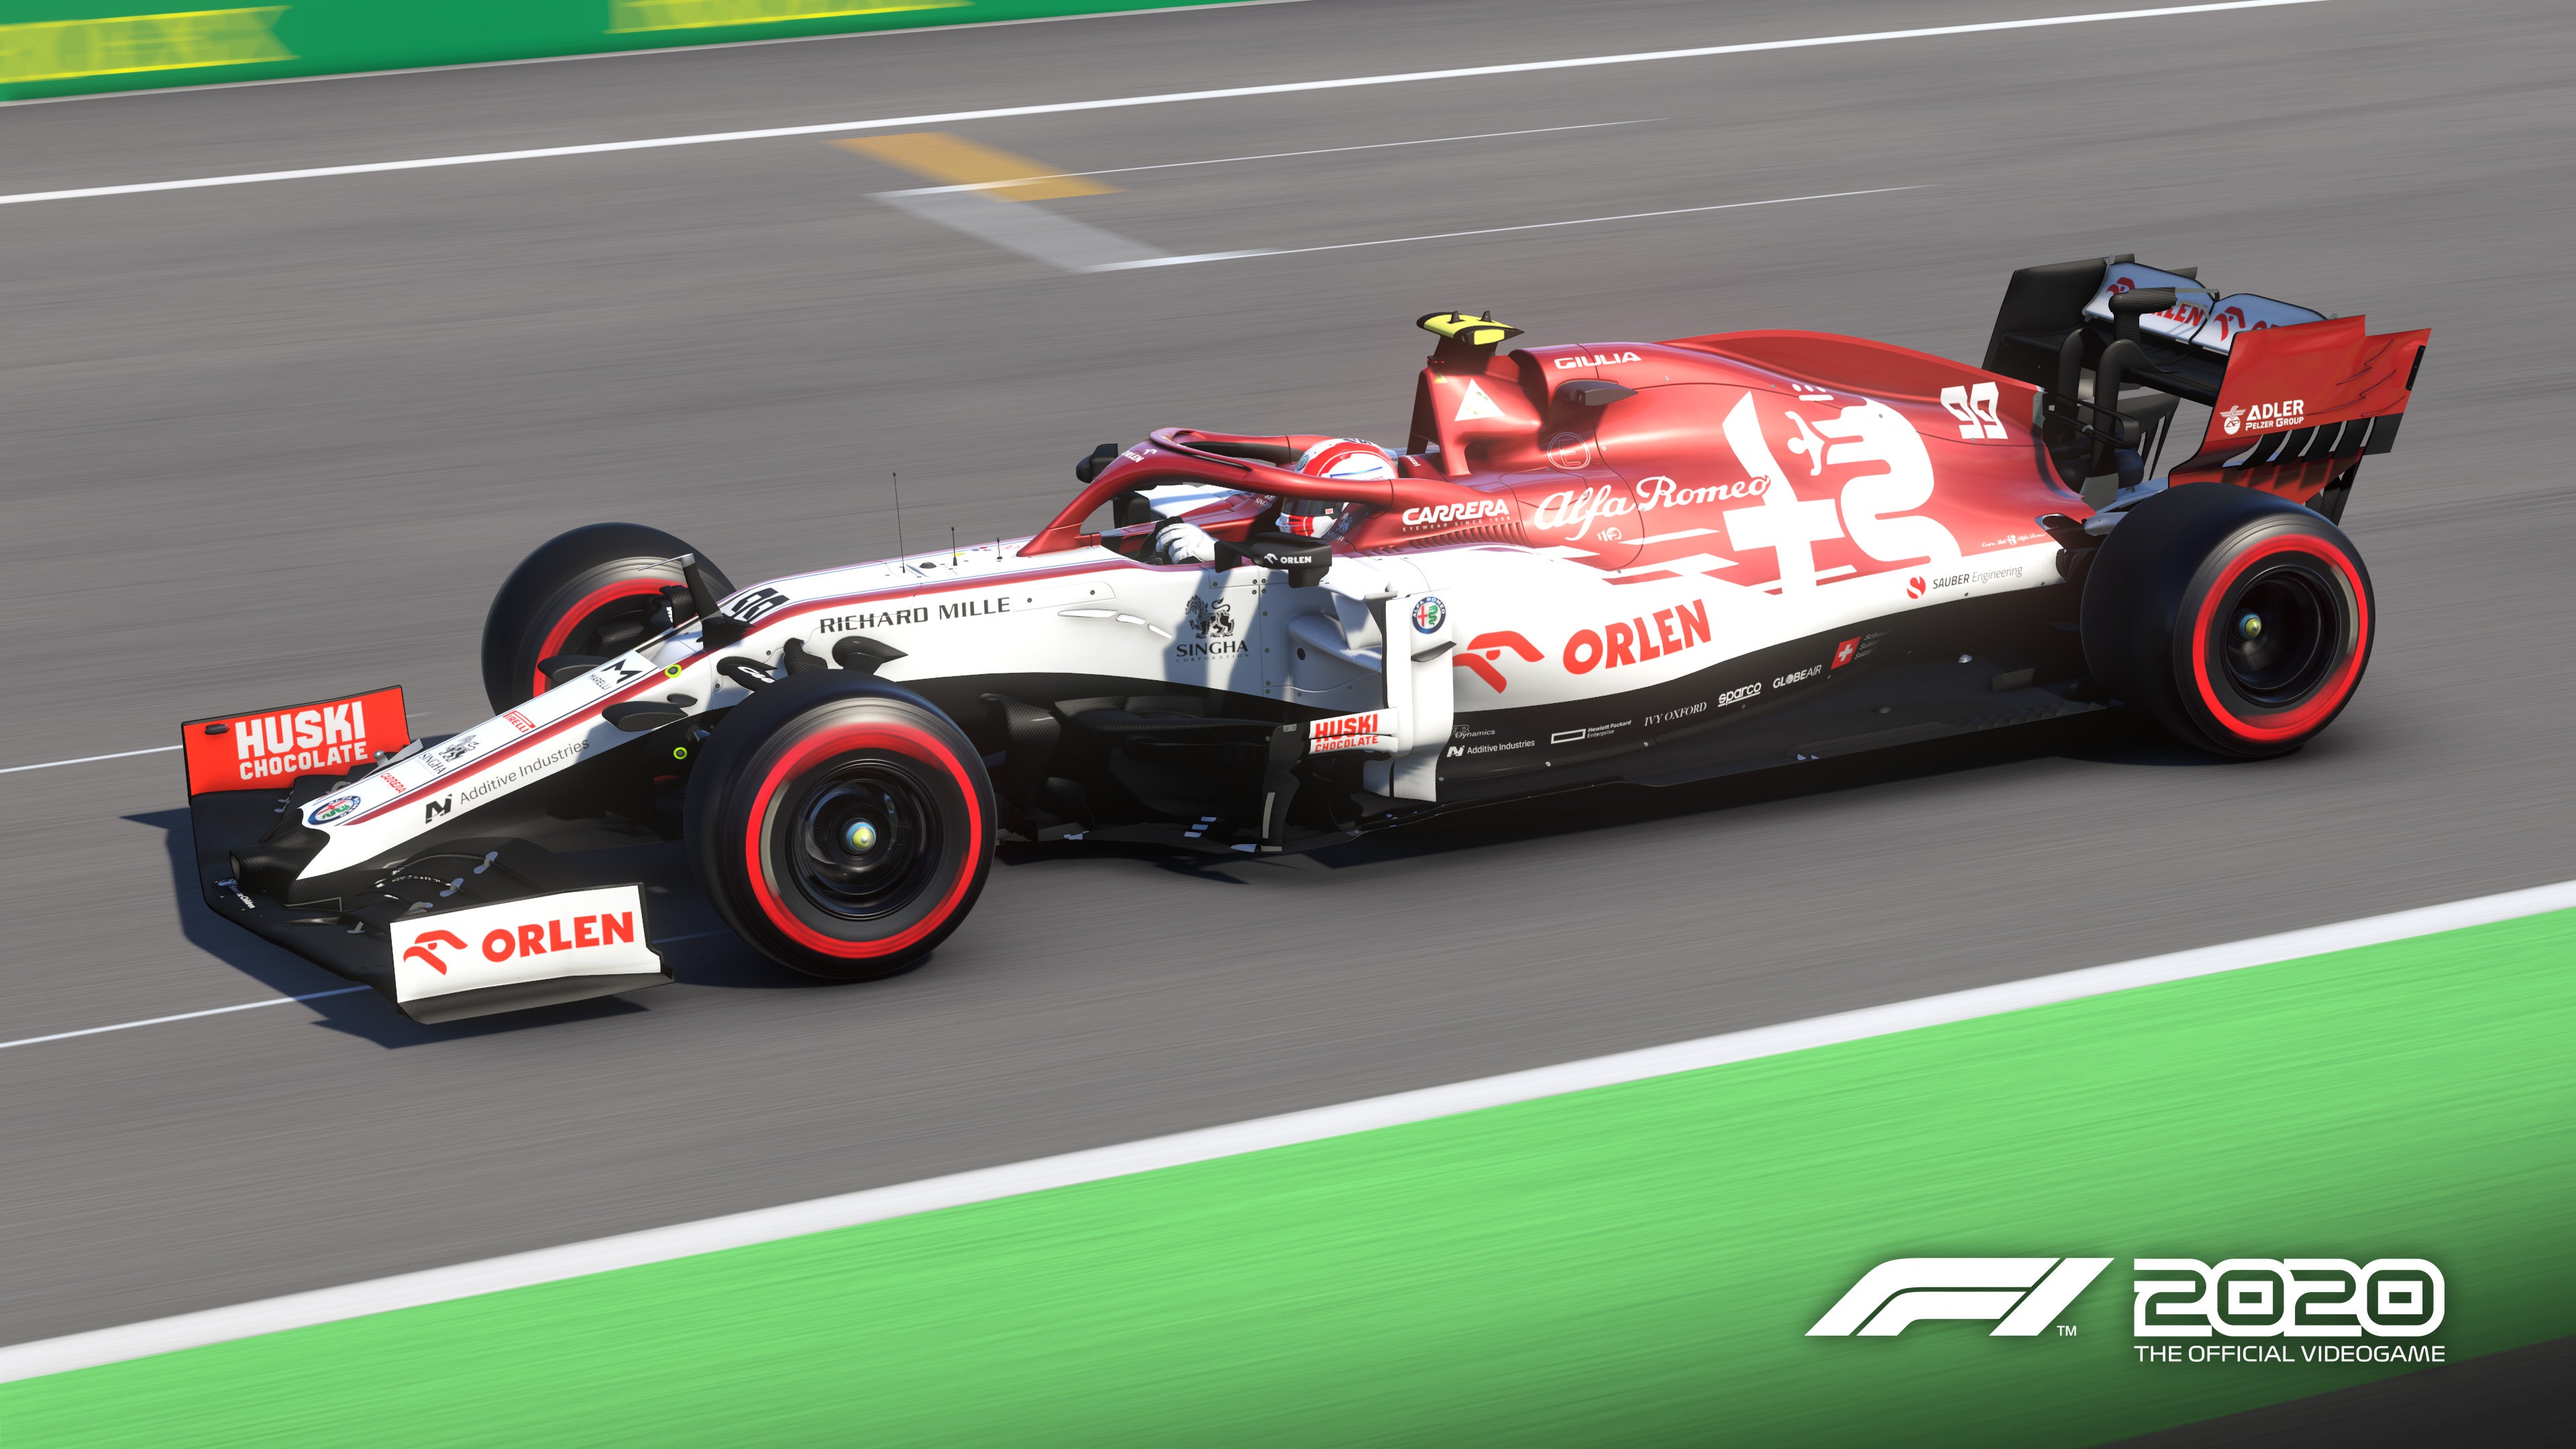 F1 2020 Beginners Guide + Walkthrough - The racing line is the key to success! - 0351DD2